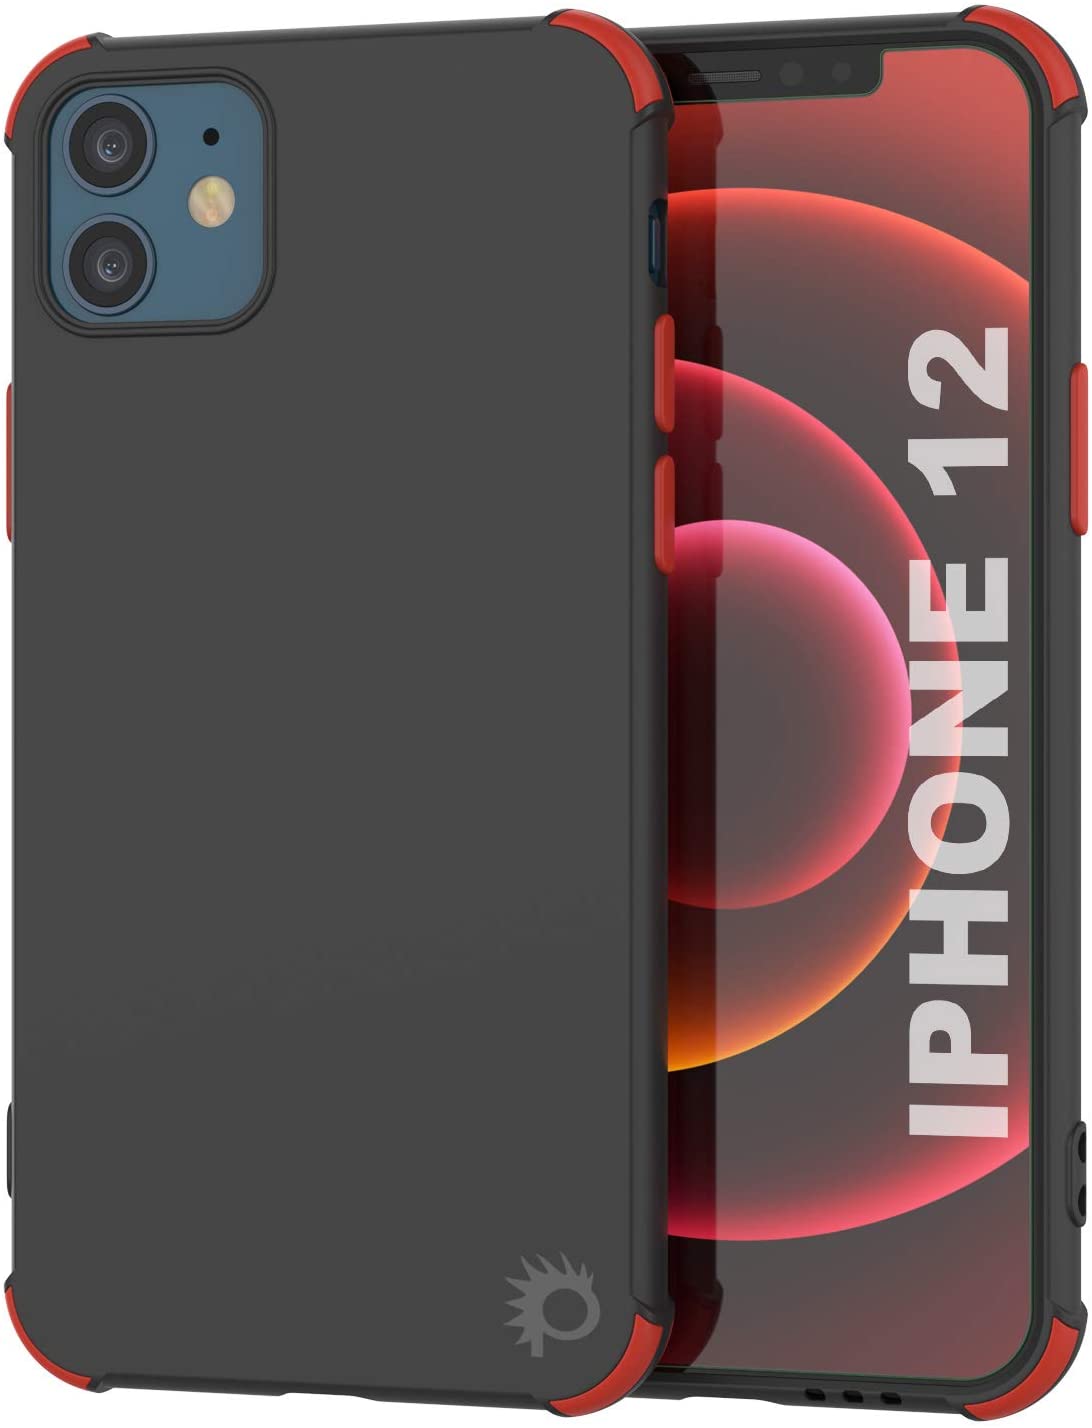 Punkcase Protective & Lightweight TPU Case [Sunshine Series] for iPhone 12 [Black] (Color in image: Black)